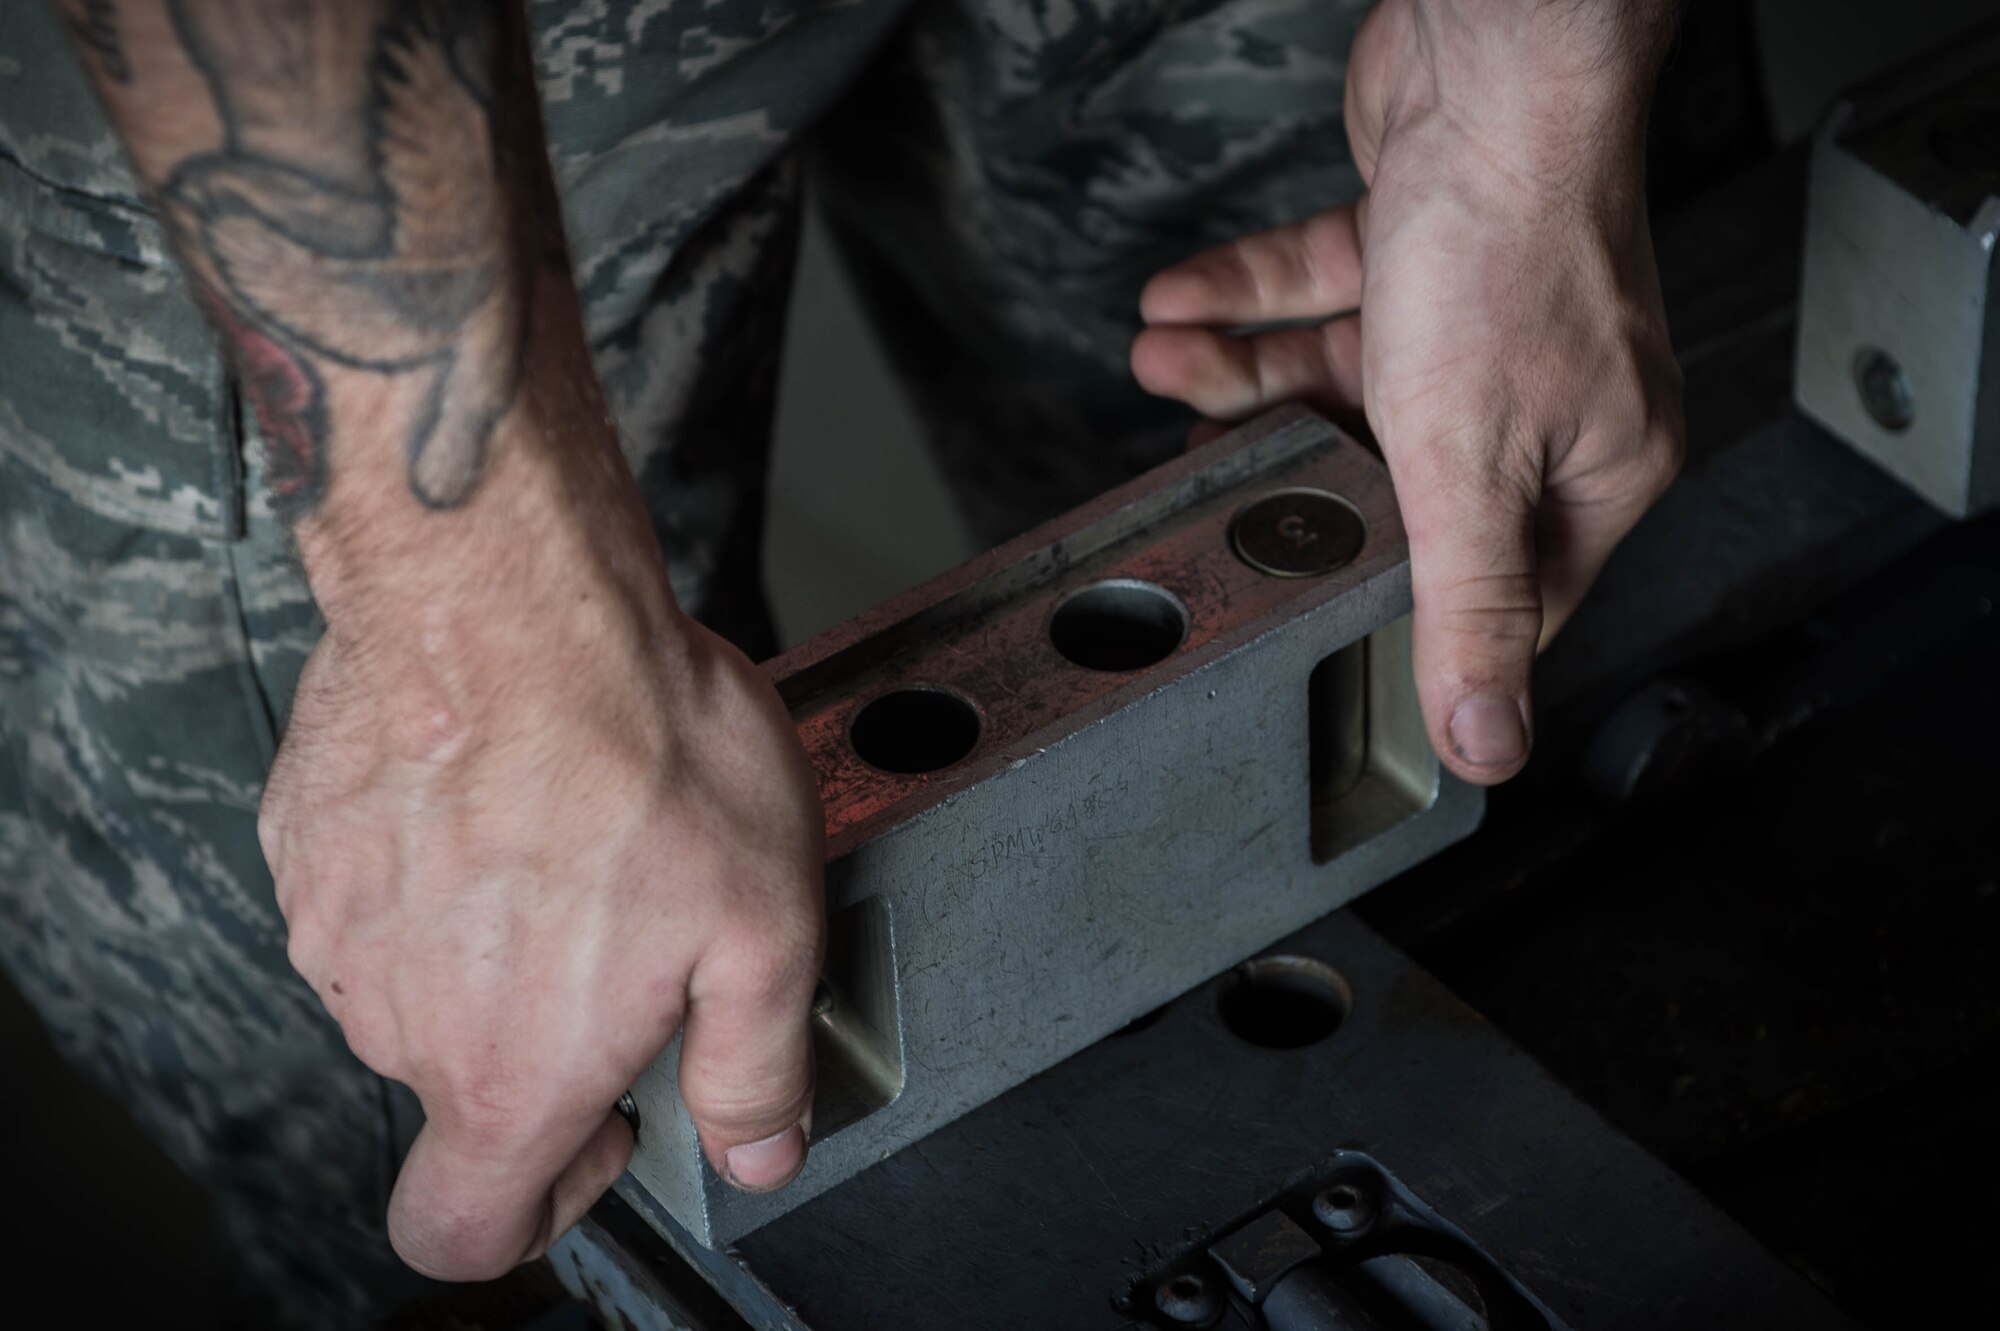 A U.S. Airman assigned to the 77th Aircraft Maintenance Unit applies roller extenders to a bomb loader at Shaw Air Force Base, S.C., Aug. 8, 2018.